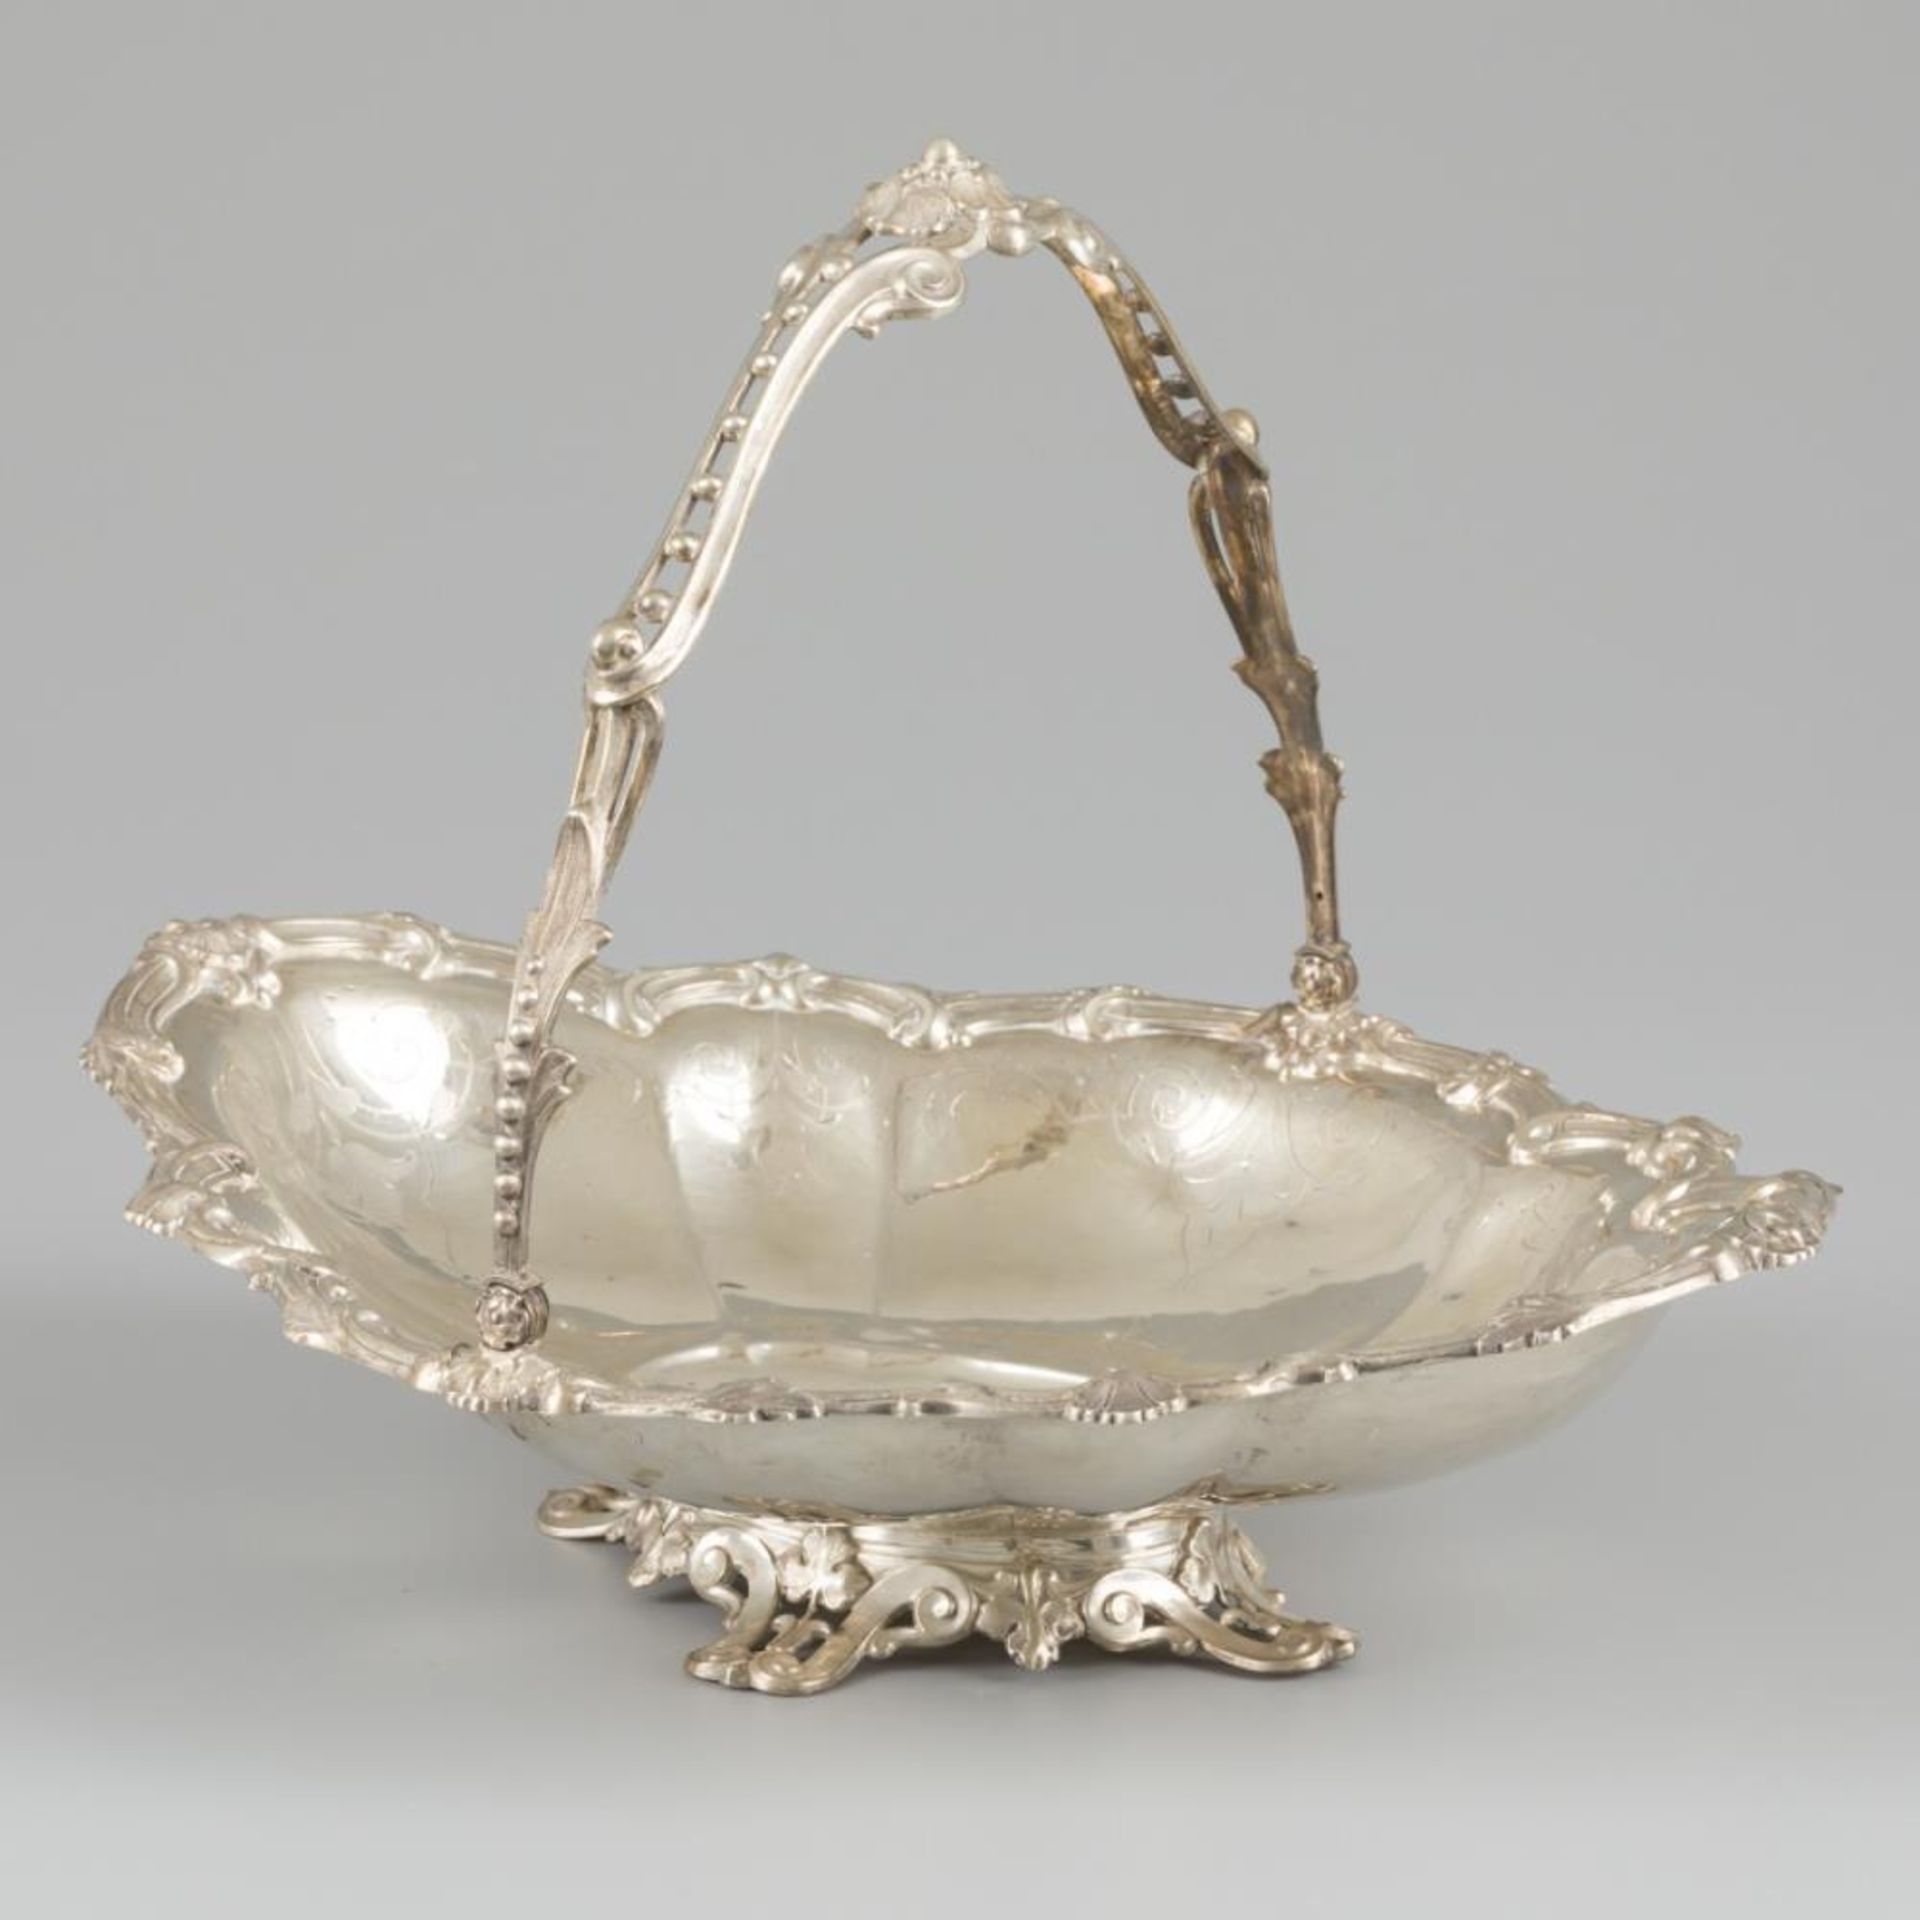 Fruit bowl on foot, silver.